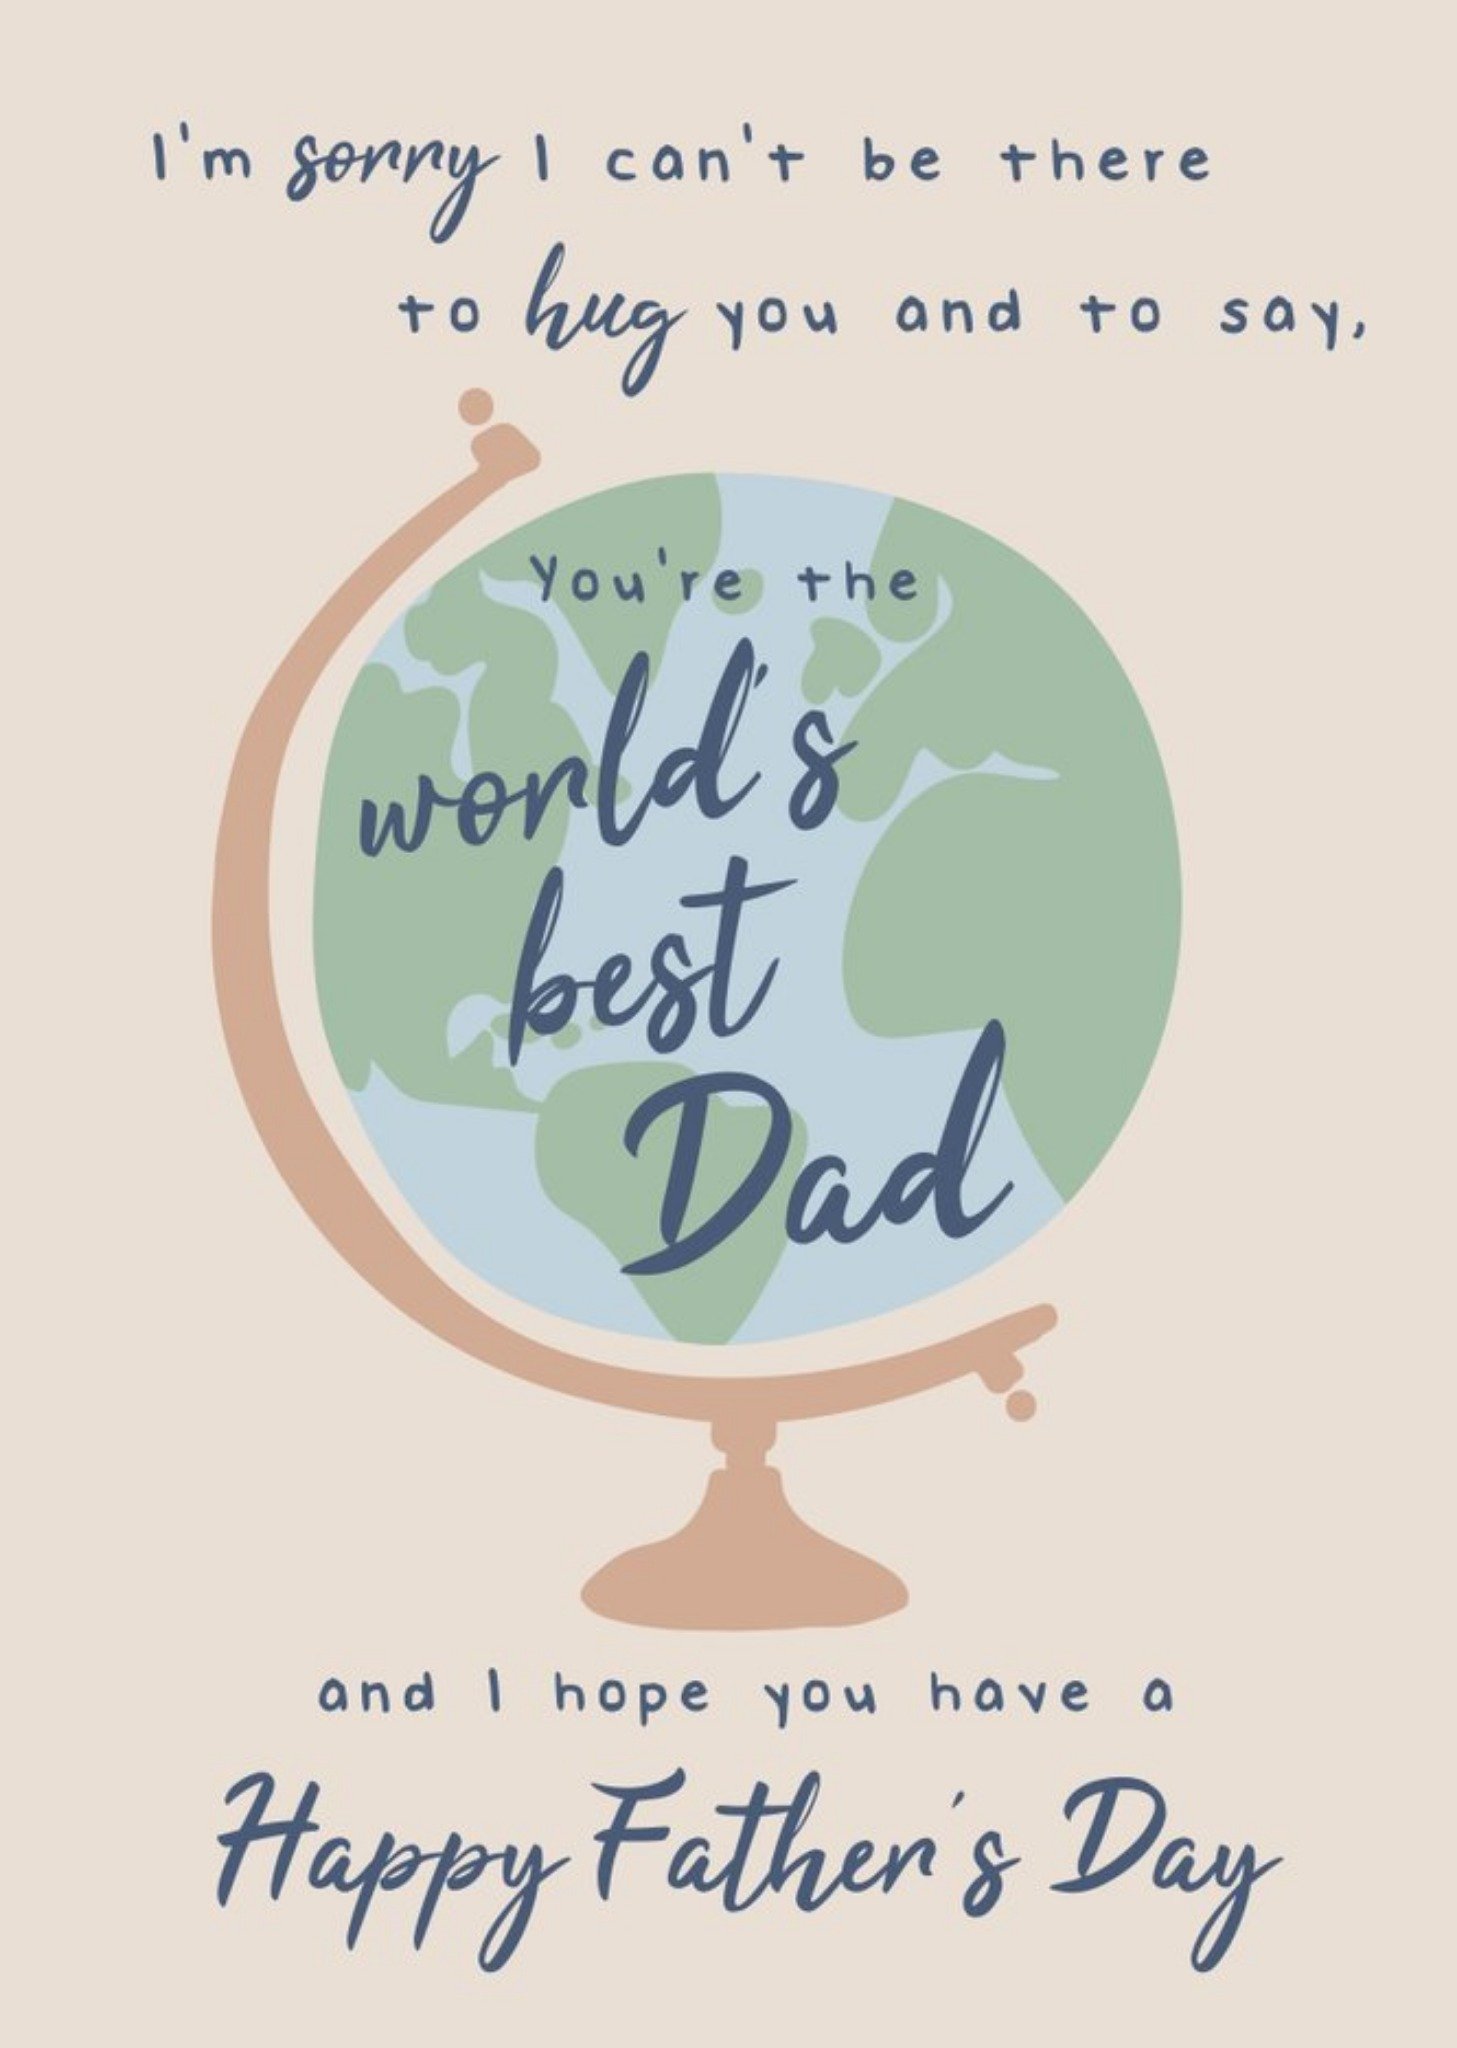 Moonpig I Cannot Be There To Hug You Sentimental Verse Worlds Best Dad Happy Fathers Card Ecard